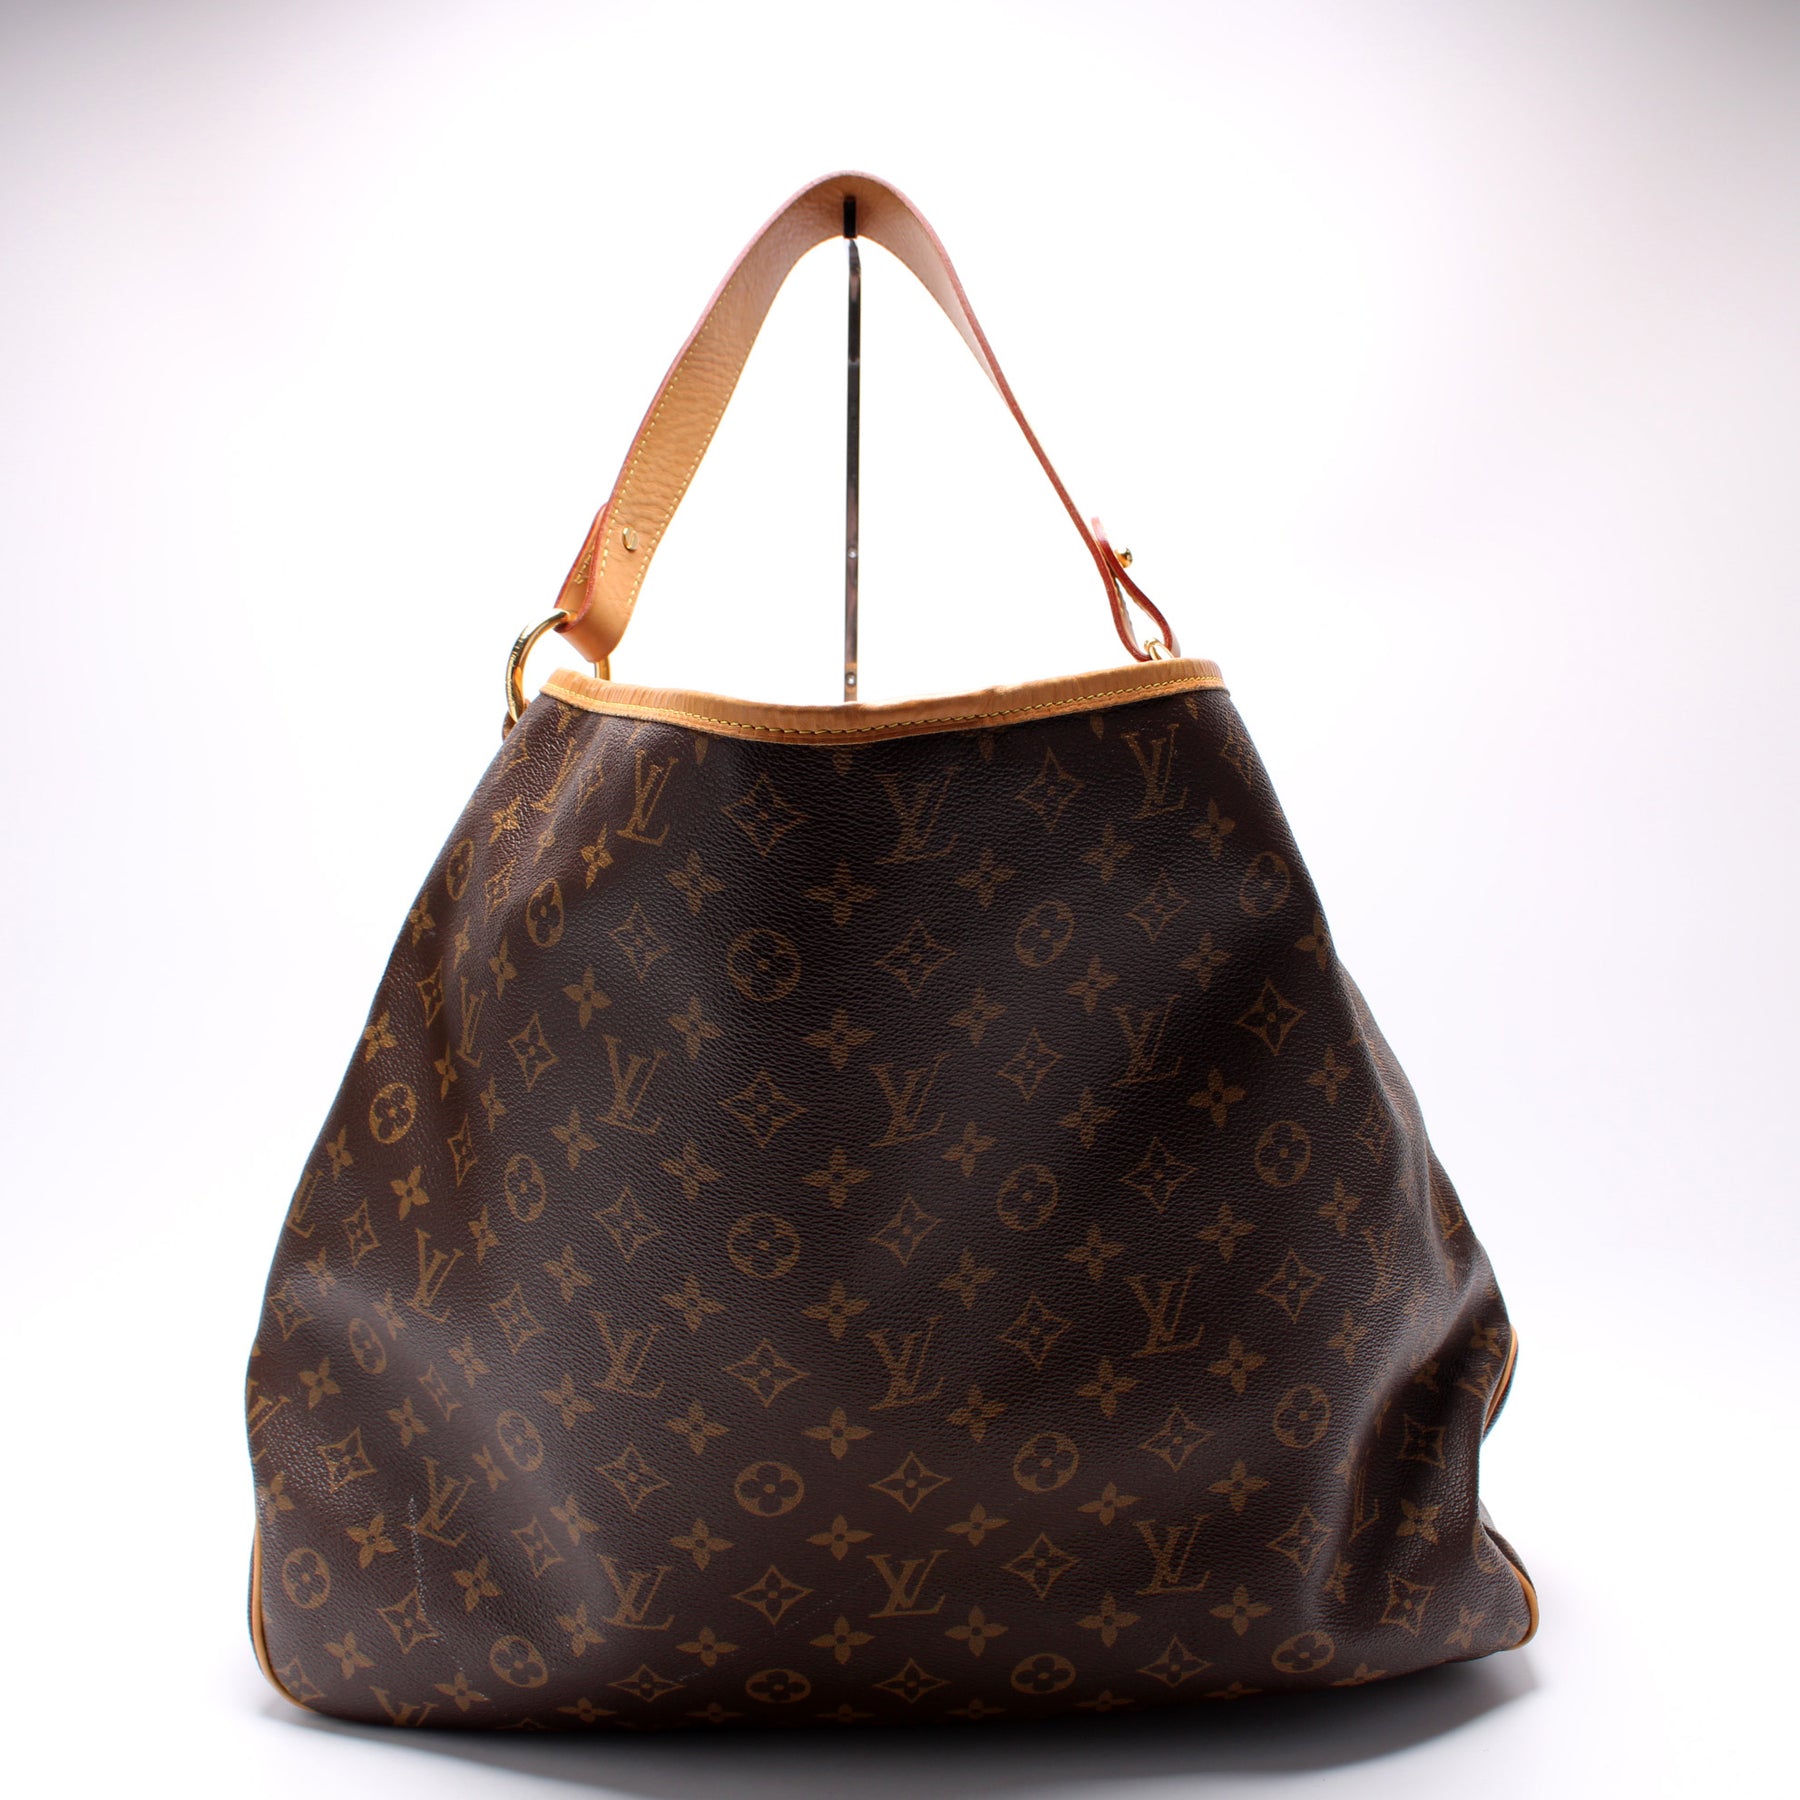 LOUIS VUITTON DELIGHTFUL GM REVIEW/ WHAT'S IN MY BAG? 